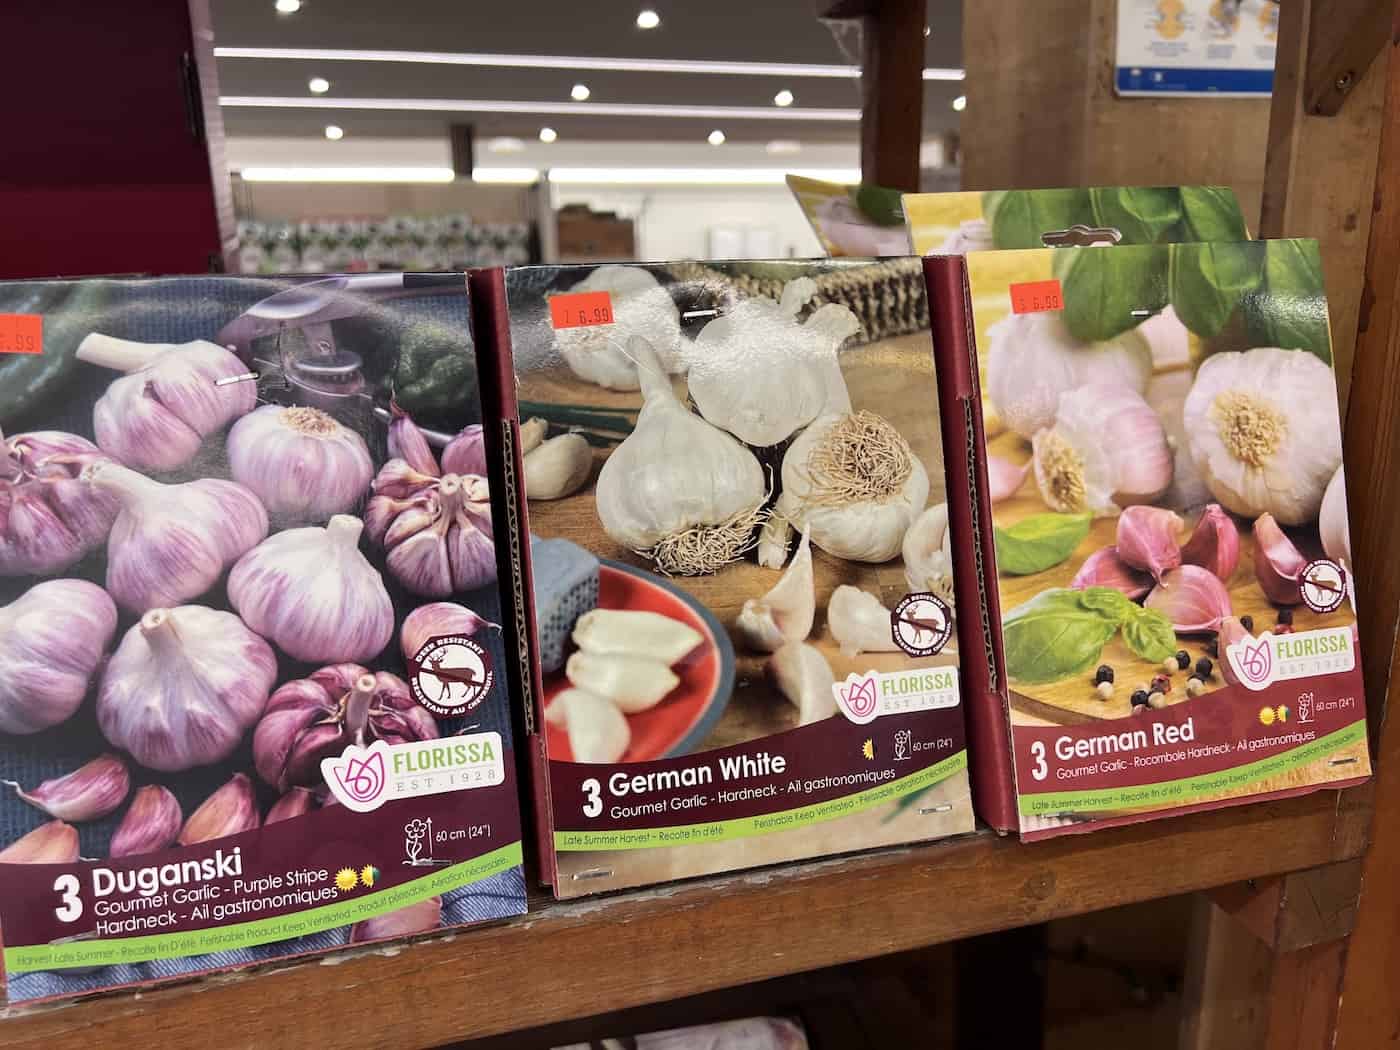 Different colors of garlic bulbs for sale for planting